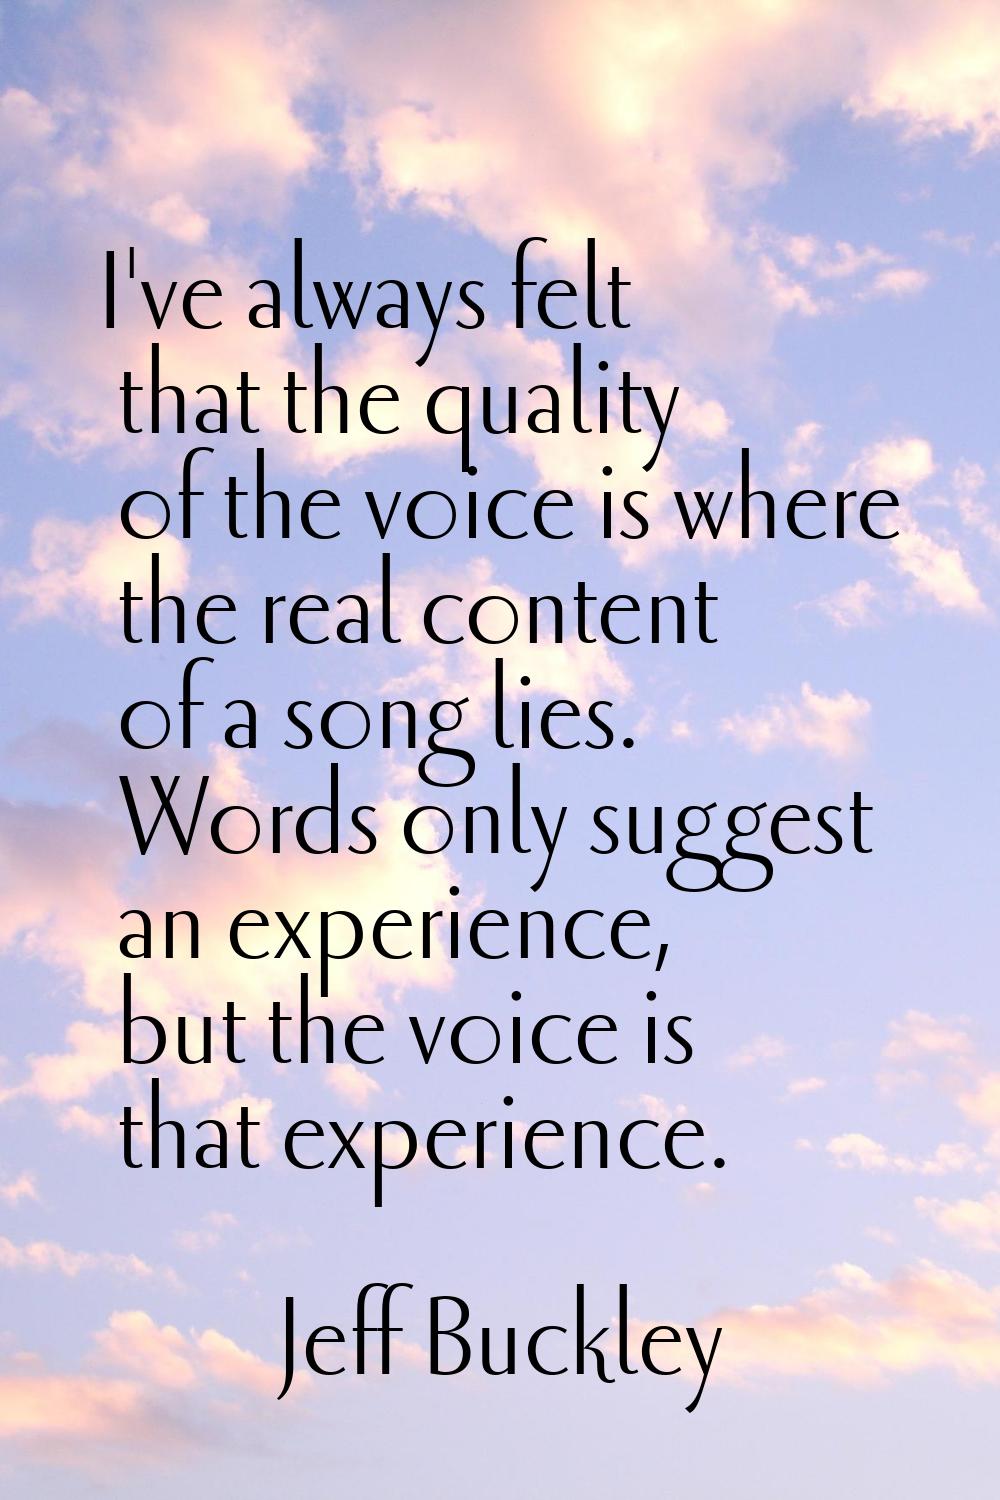 I've always felt that the quality of the voice is where the real content of a song lies. Words only